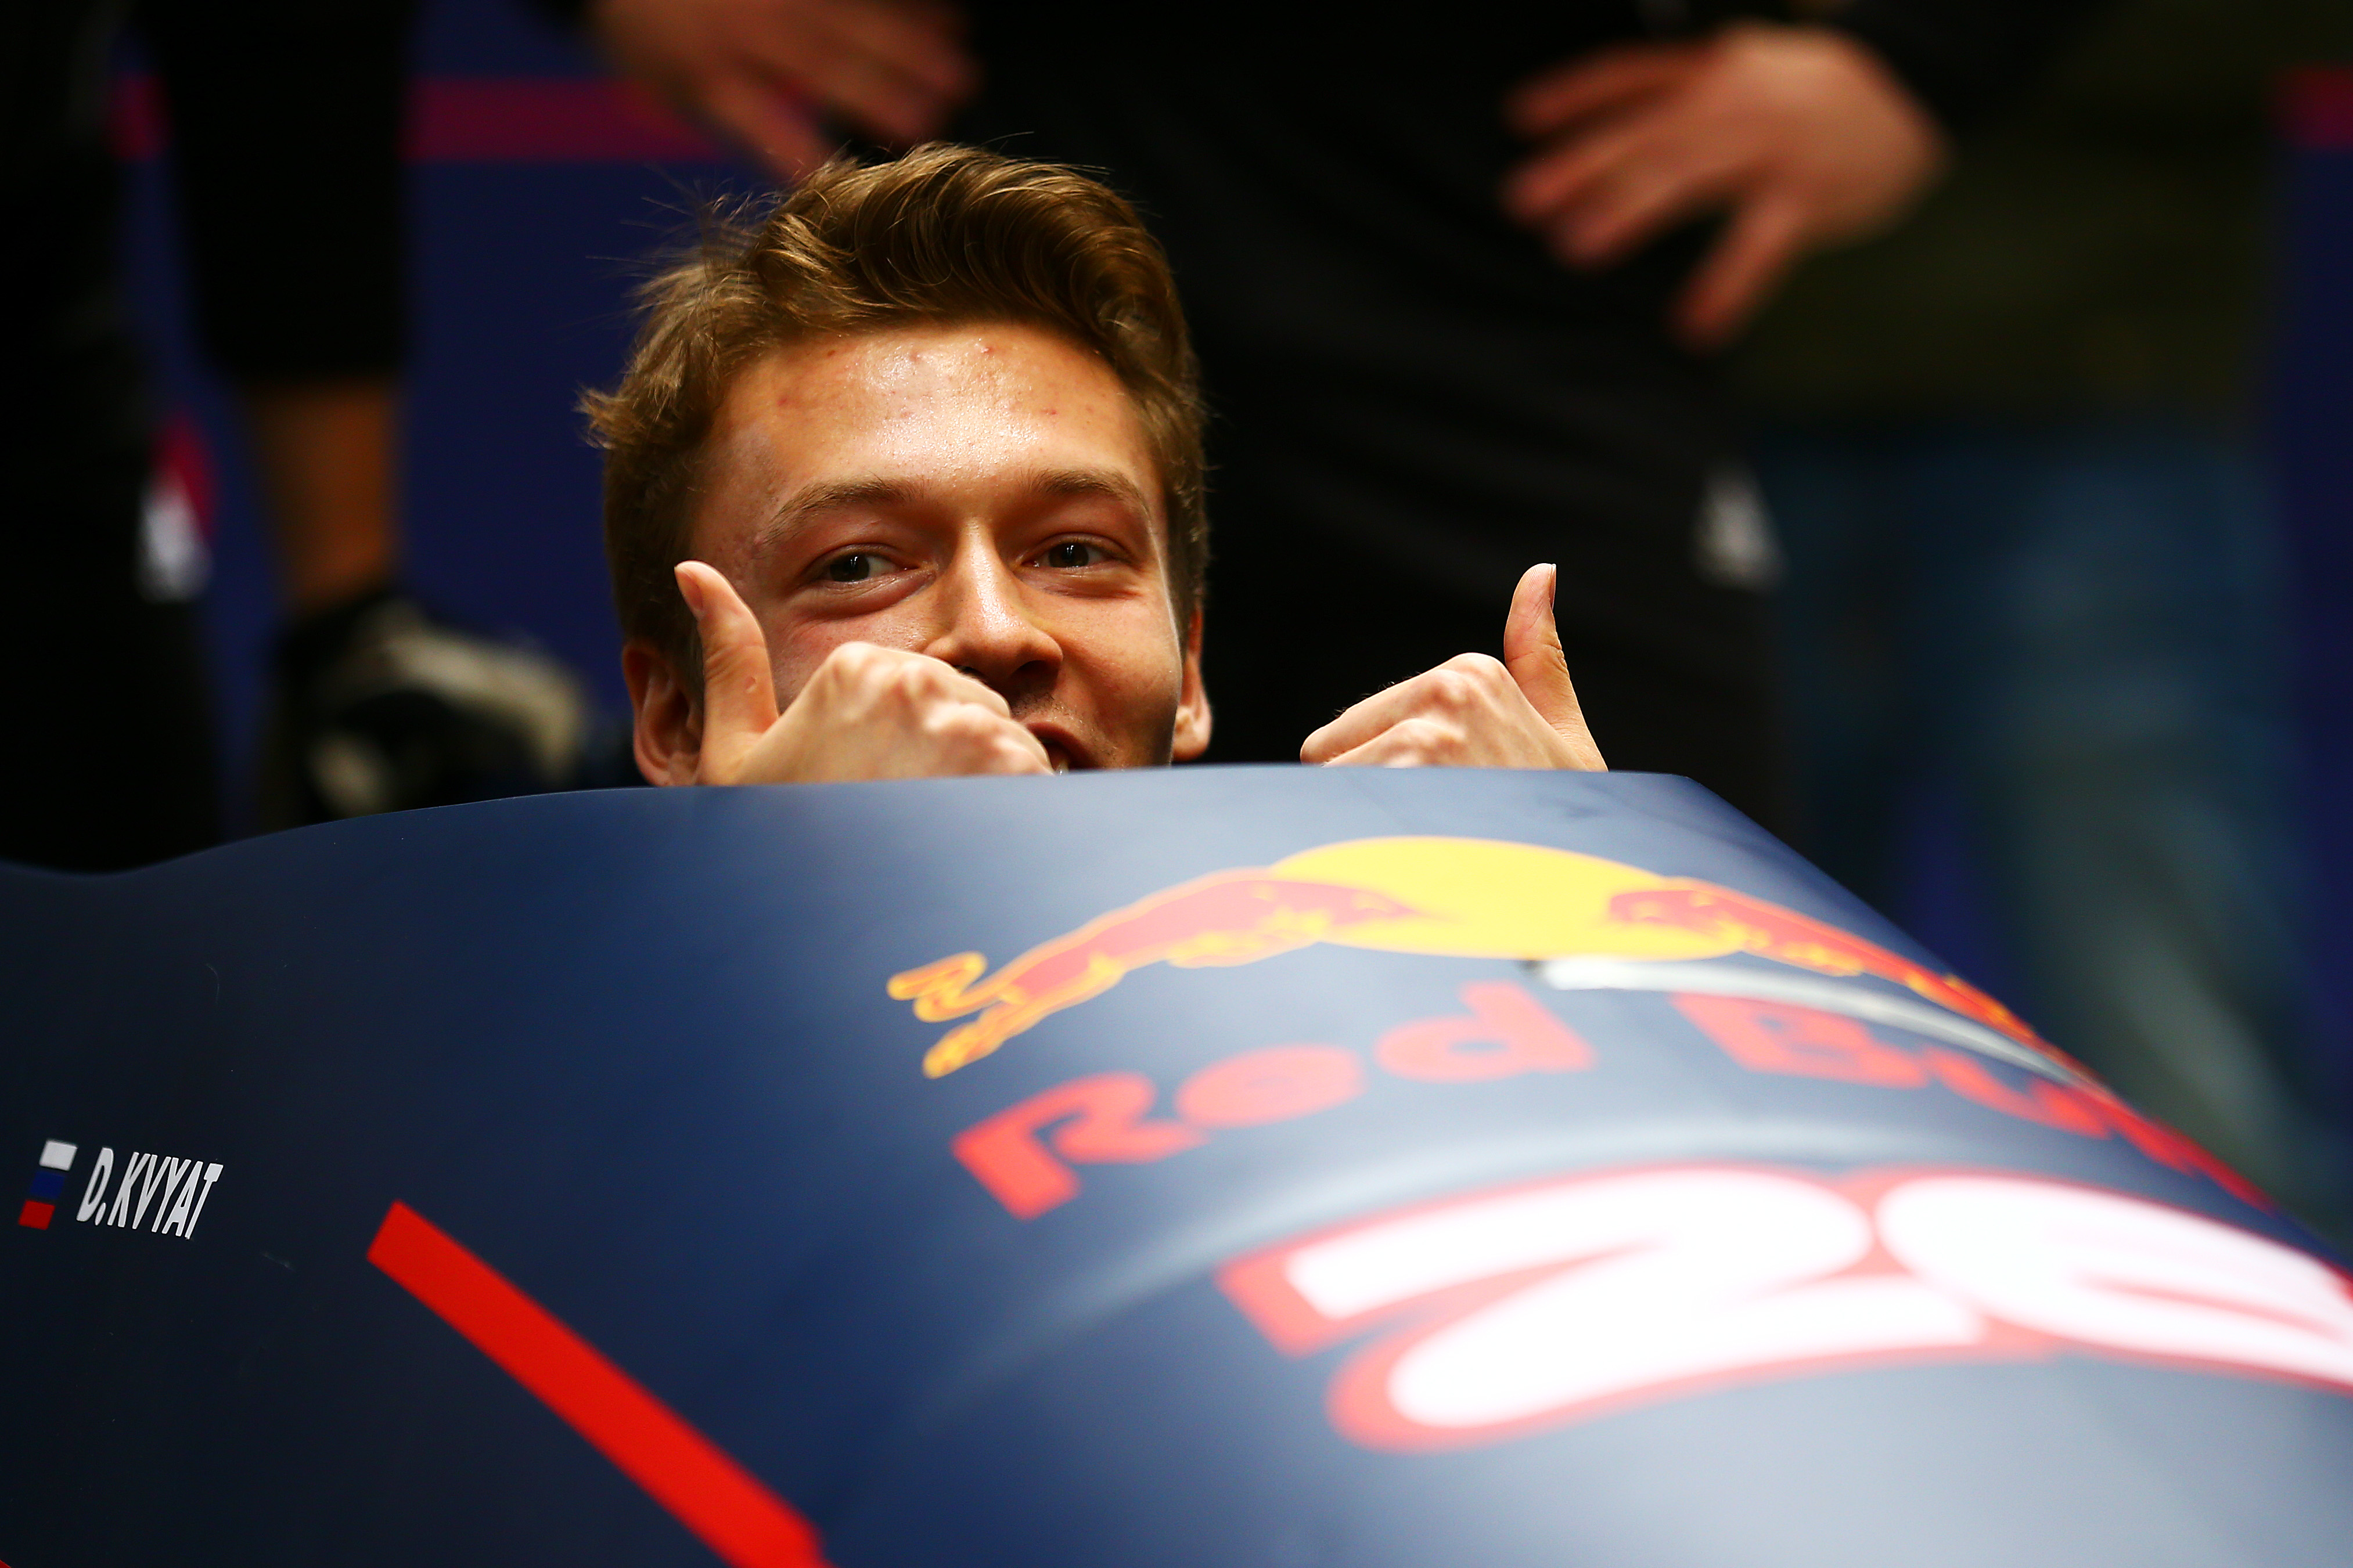 SOCHI, RUSSIA - APRIL 27: Daniil Kvyat of Russia and Red Bull Racing sits in a bobsleigh during previews to the Formula One Grand Prix of Russia at Sanki Sliding Centre on April 27, 2016 in Sochi, Russia. (Photo by Dan Istitene/Getty Images)